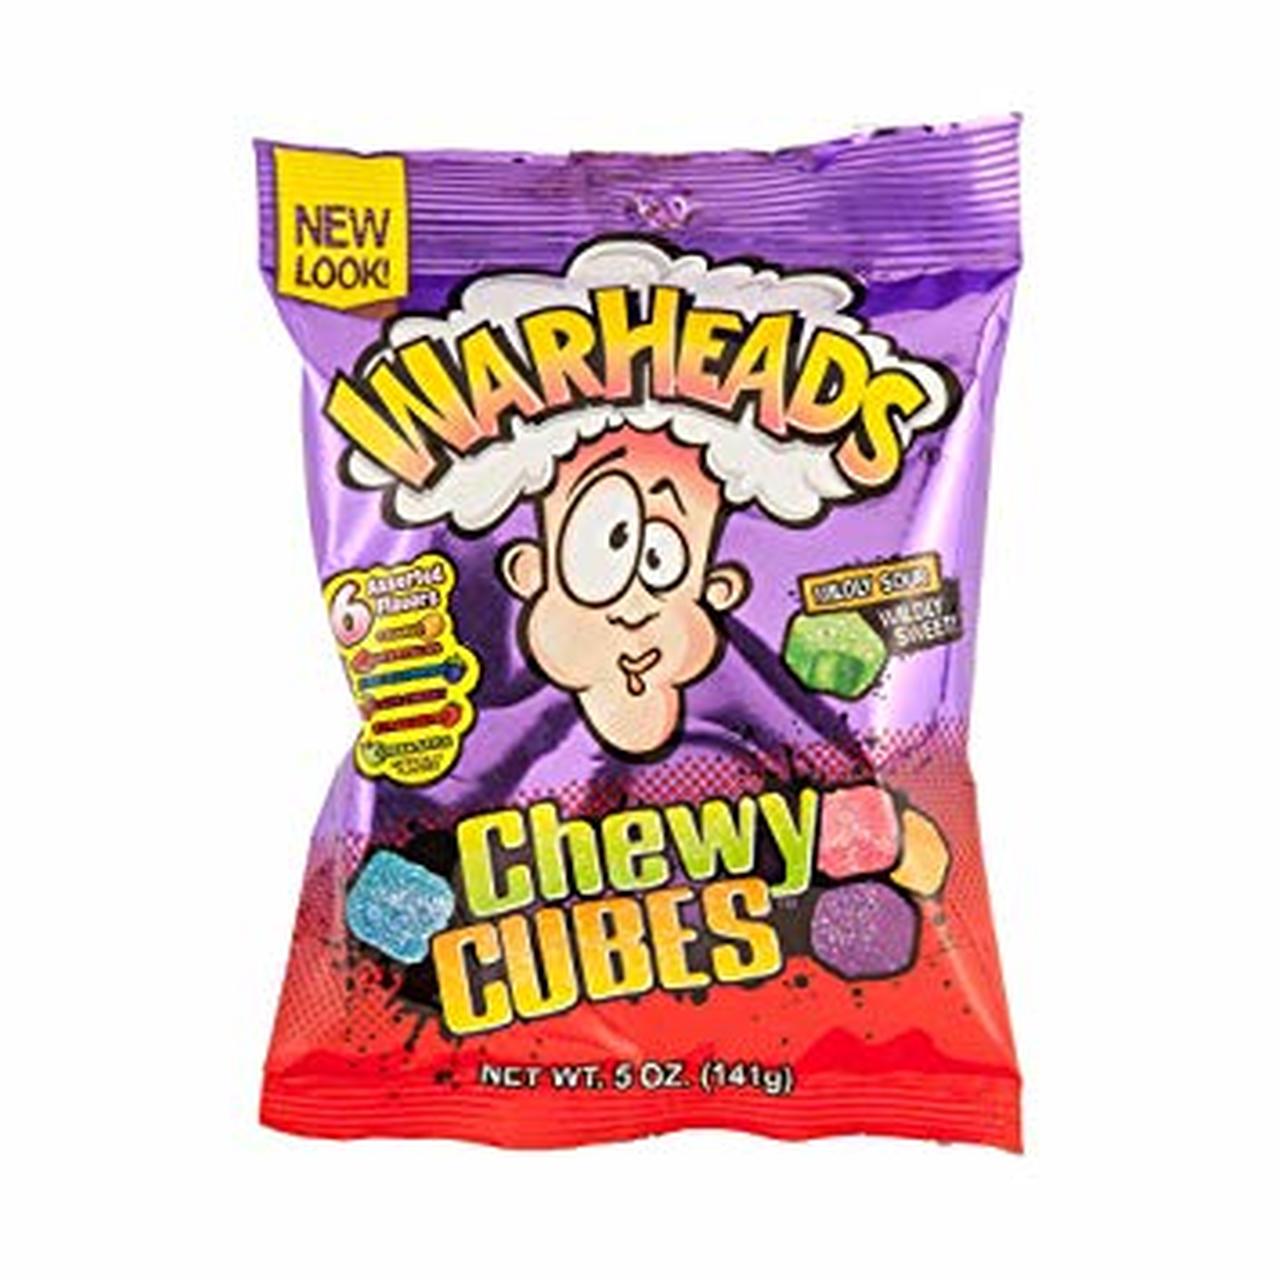 Warheads Sour Chewy Cubes 5oz